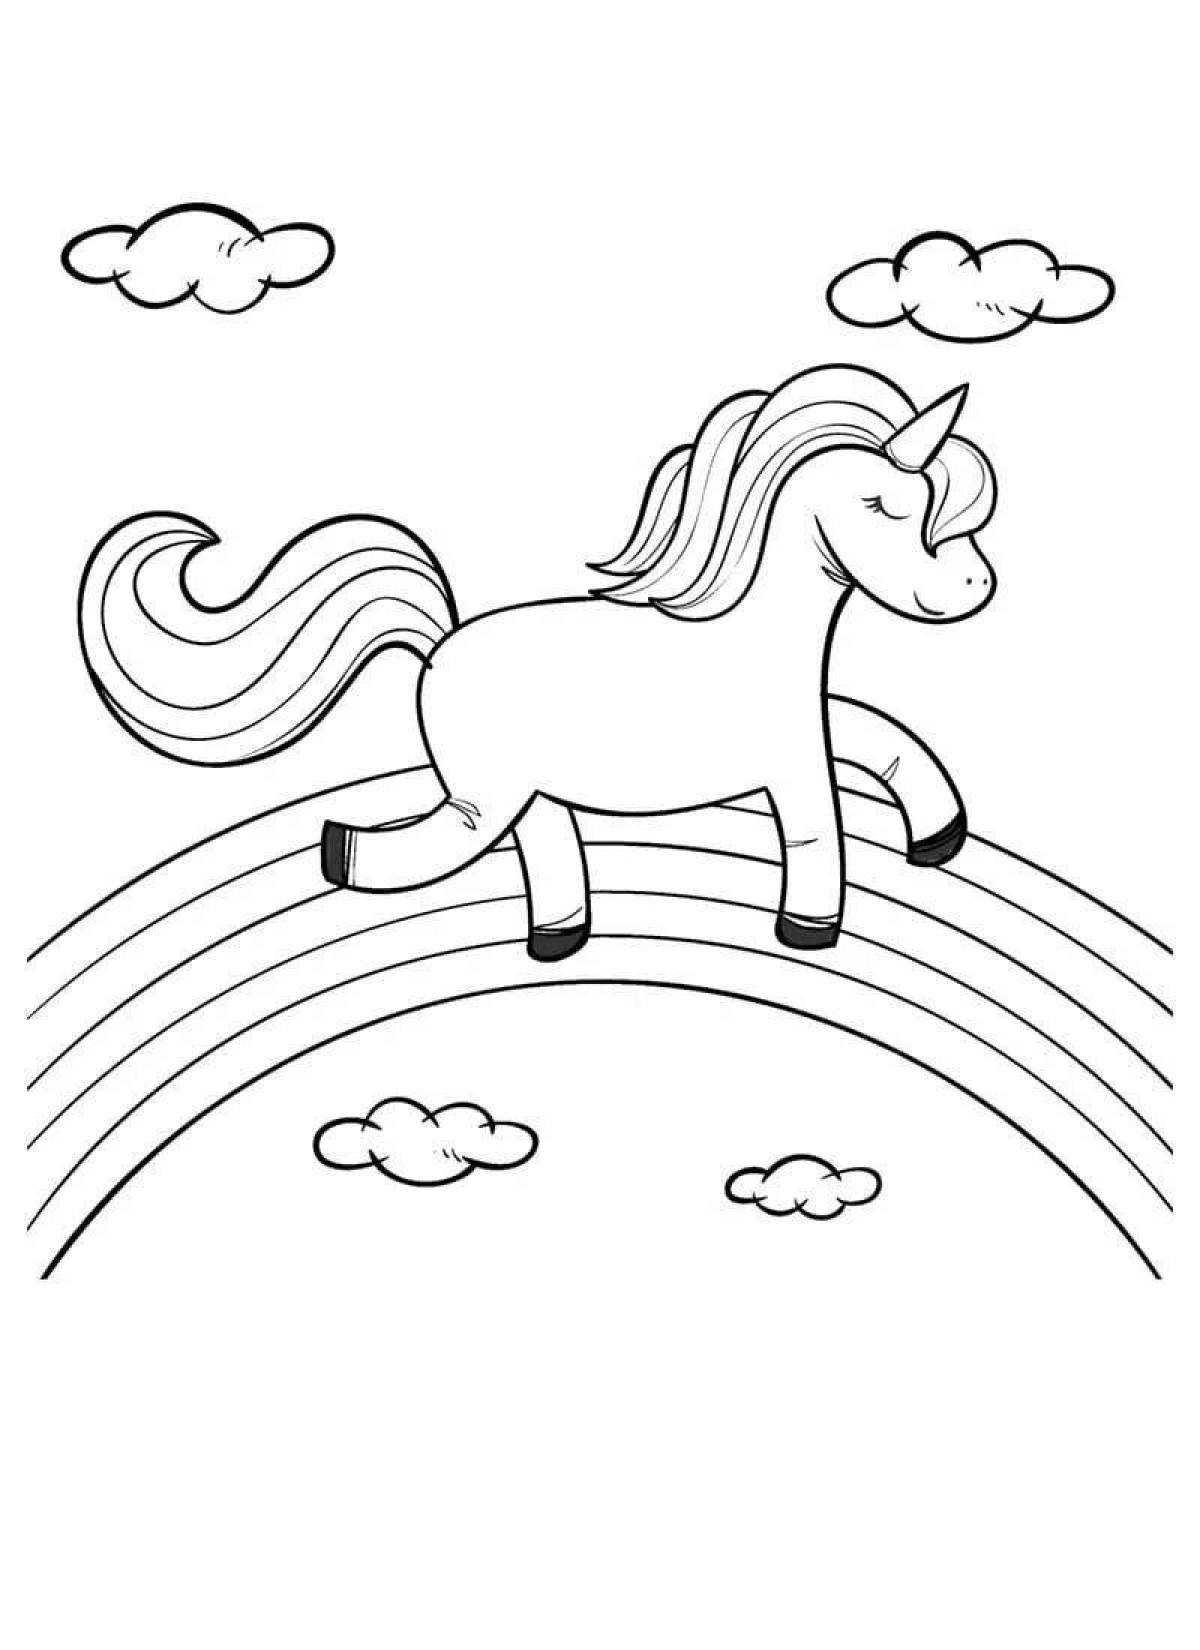 Sublime coloring page единорог с радугой